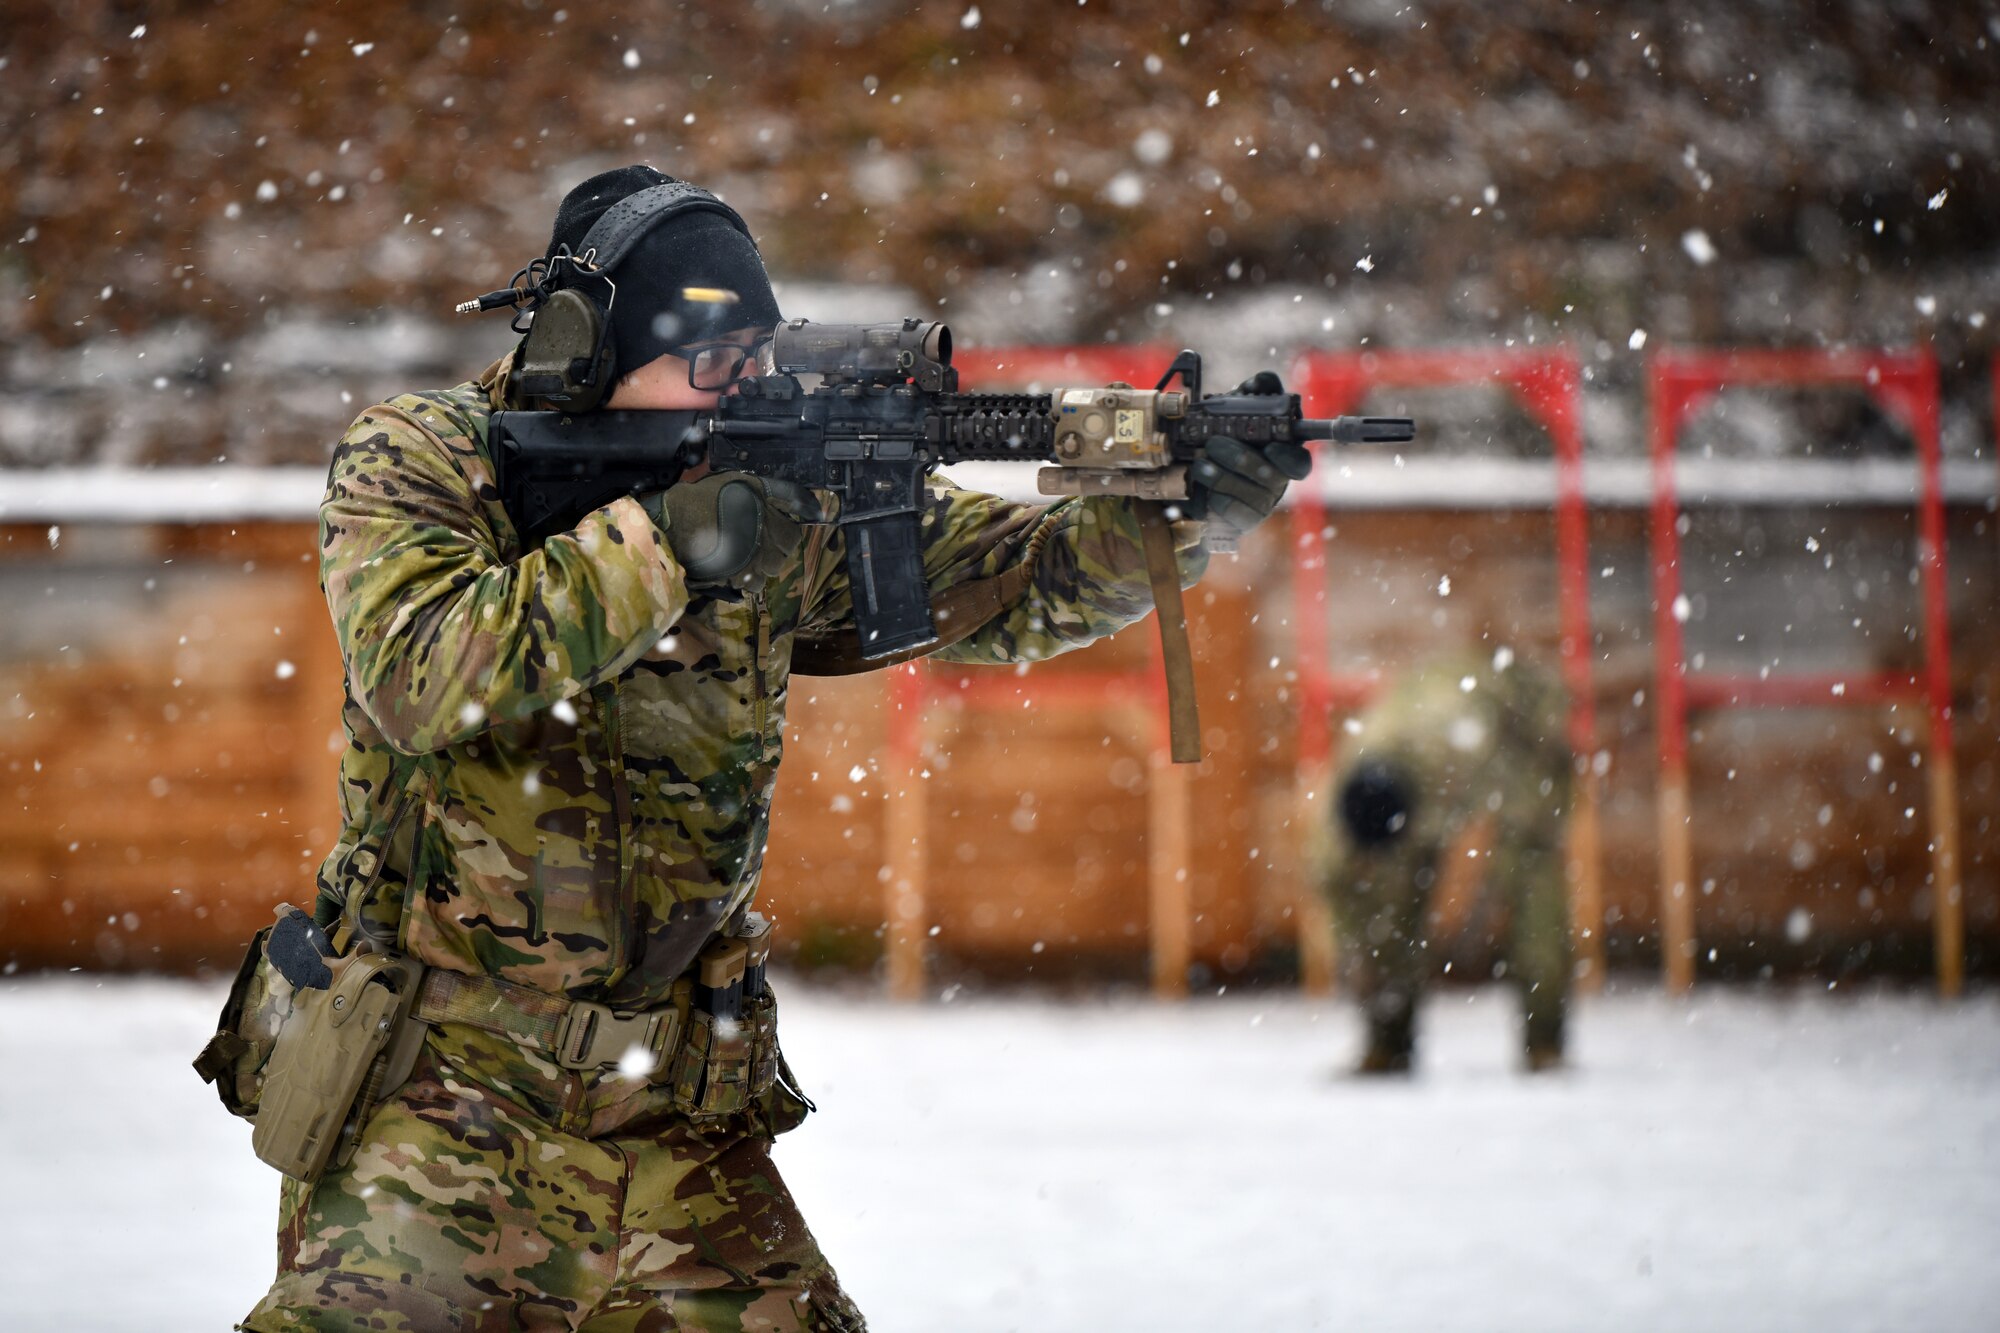 A soldier fires a weapon in a snowstorm.